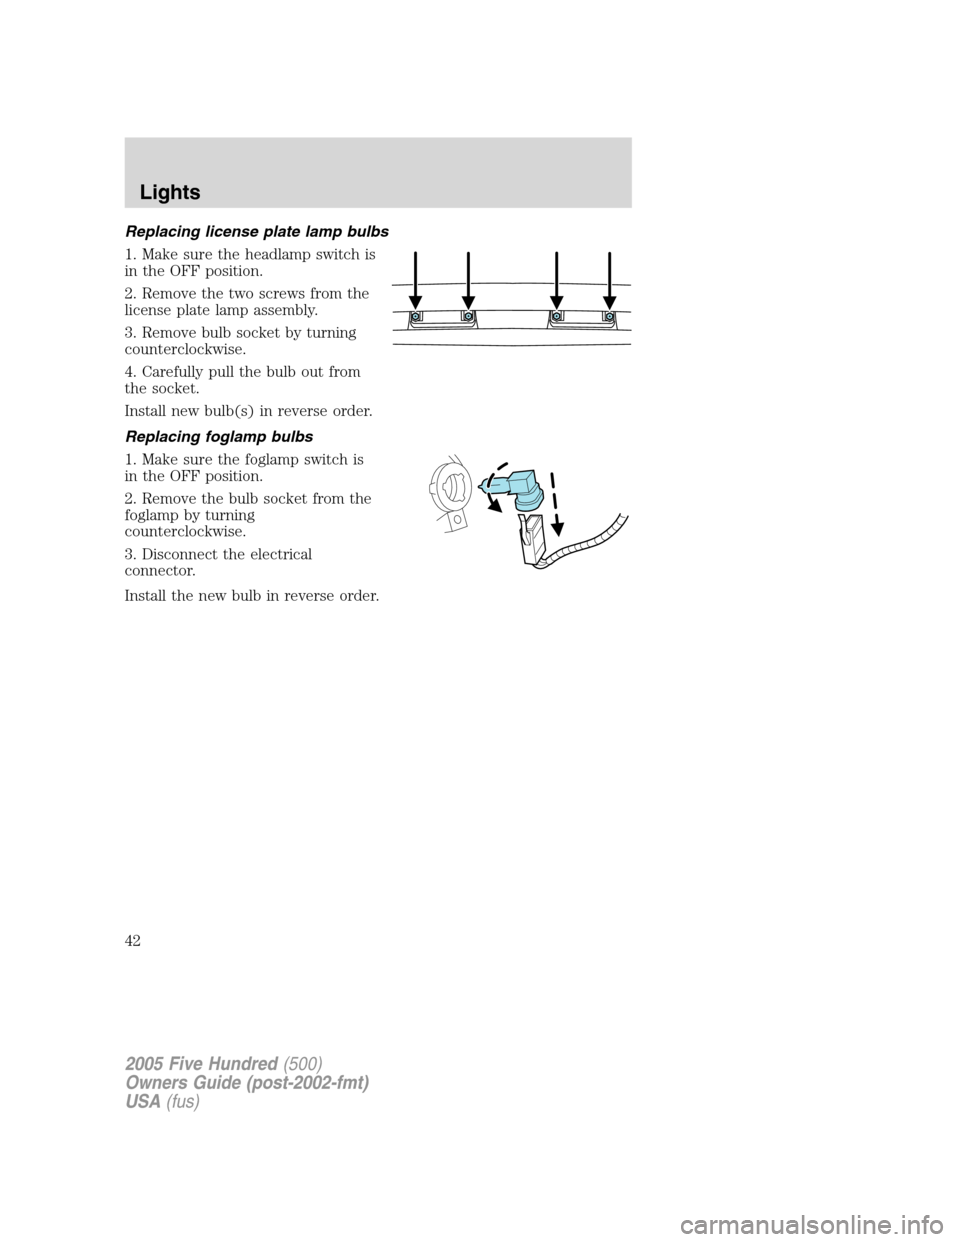 FORD FIVE HUNDRED 2005 D258 / 1.G Service Manual Replacing license plate lamp bulbs
1. Make sure the headlamp switch is
in the OFF position.
2. Remove the two screws from the
license plate lamp assembly.
3. Remove bulb socket by turning
counterclock